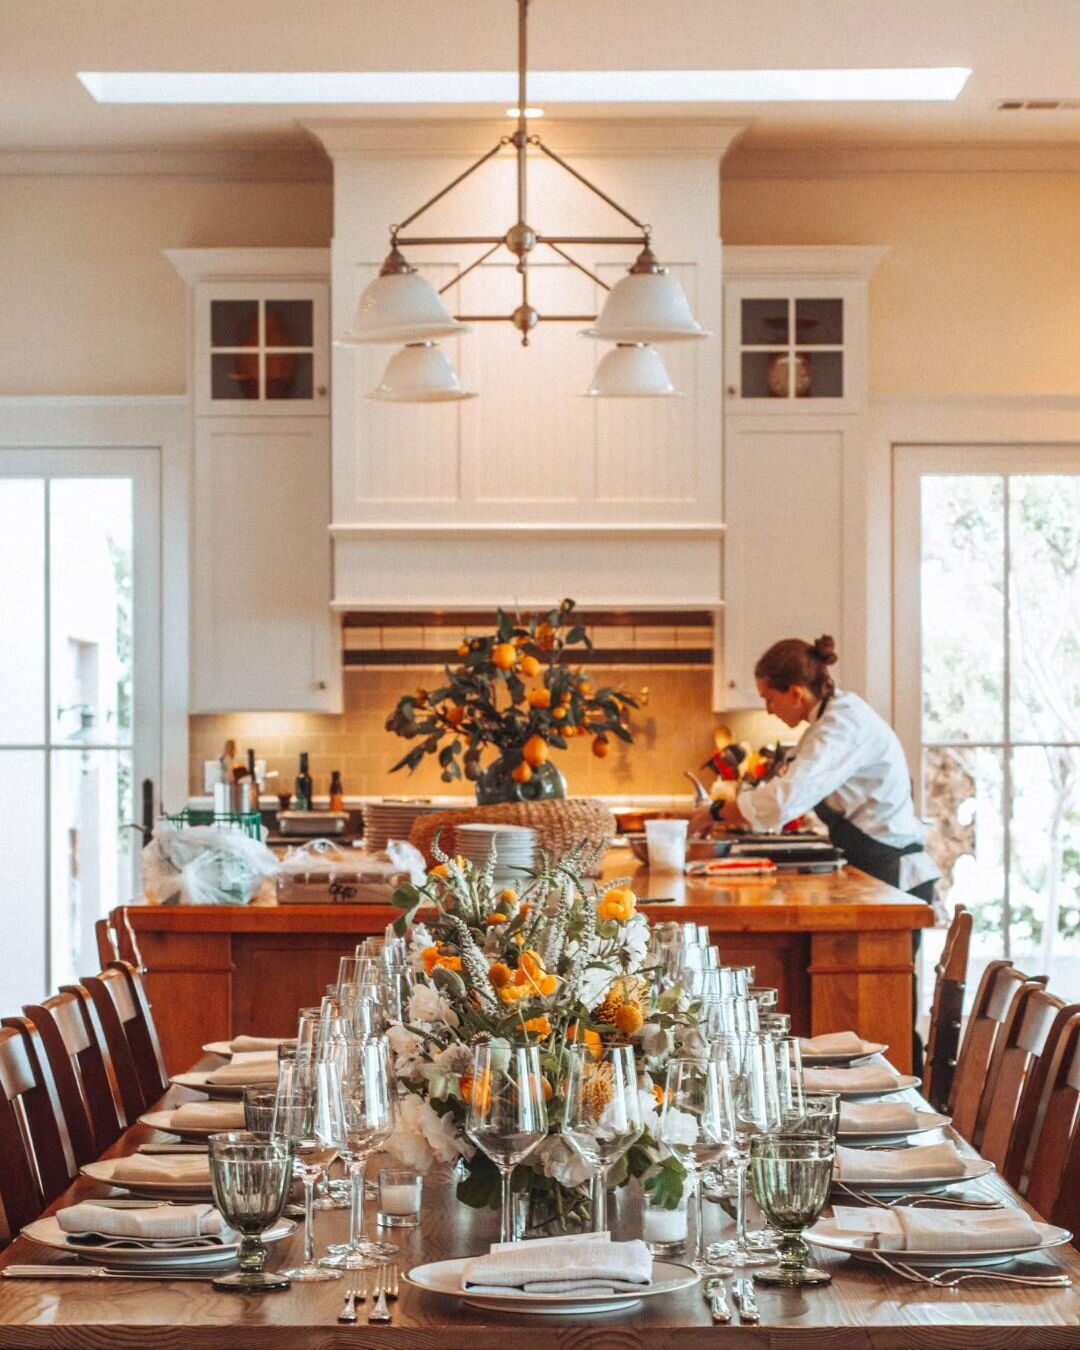 🍇🍷 Living the dream in Napa Valley! 🏡✨ You've just unlocked the doors to your fabulous villa, and the excitement is real! 🌟 You hired Cultured Vine to curate your private dinner experience, and now your taste buds are about to embark on a journey